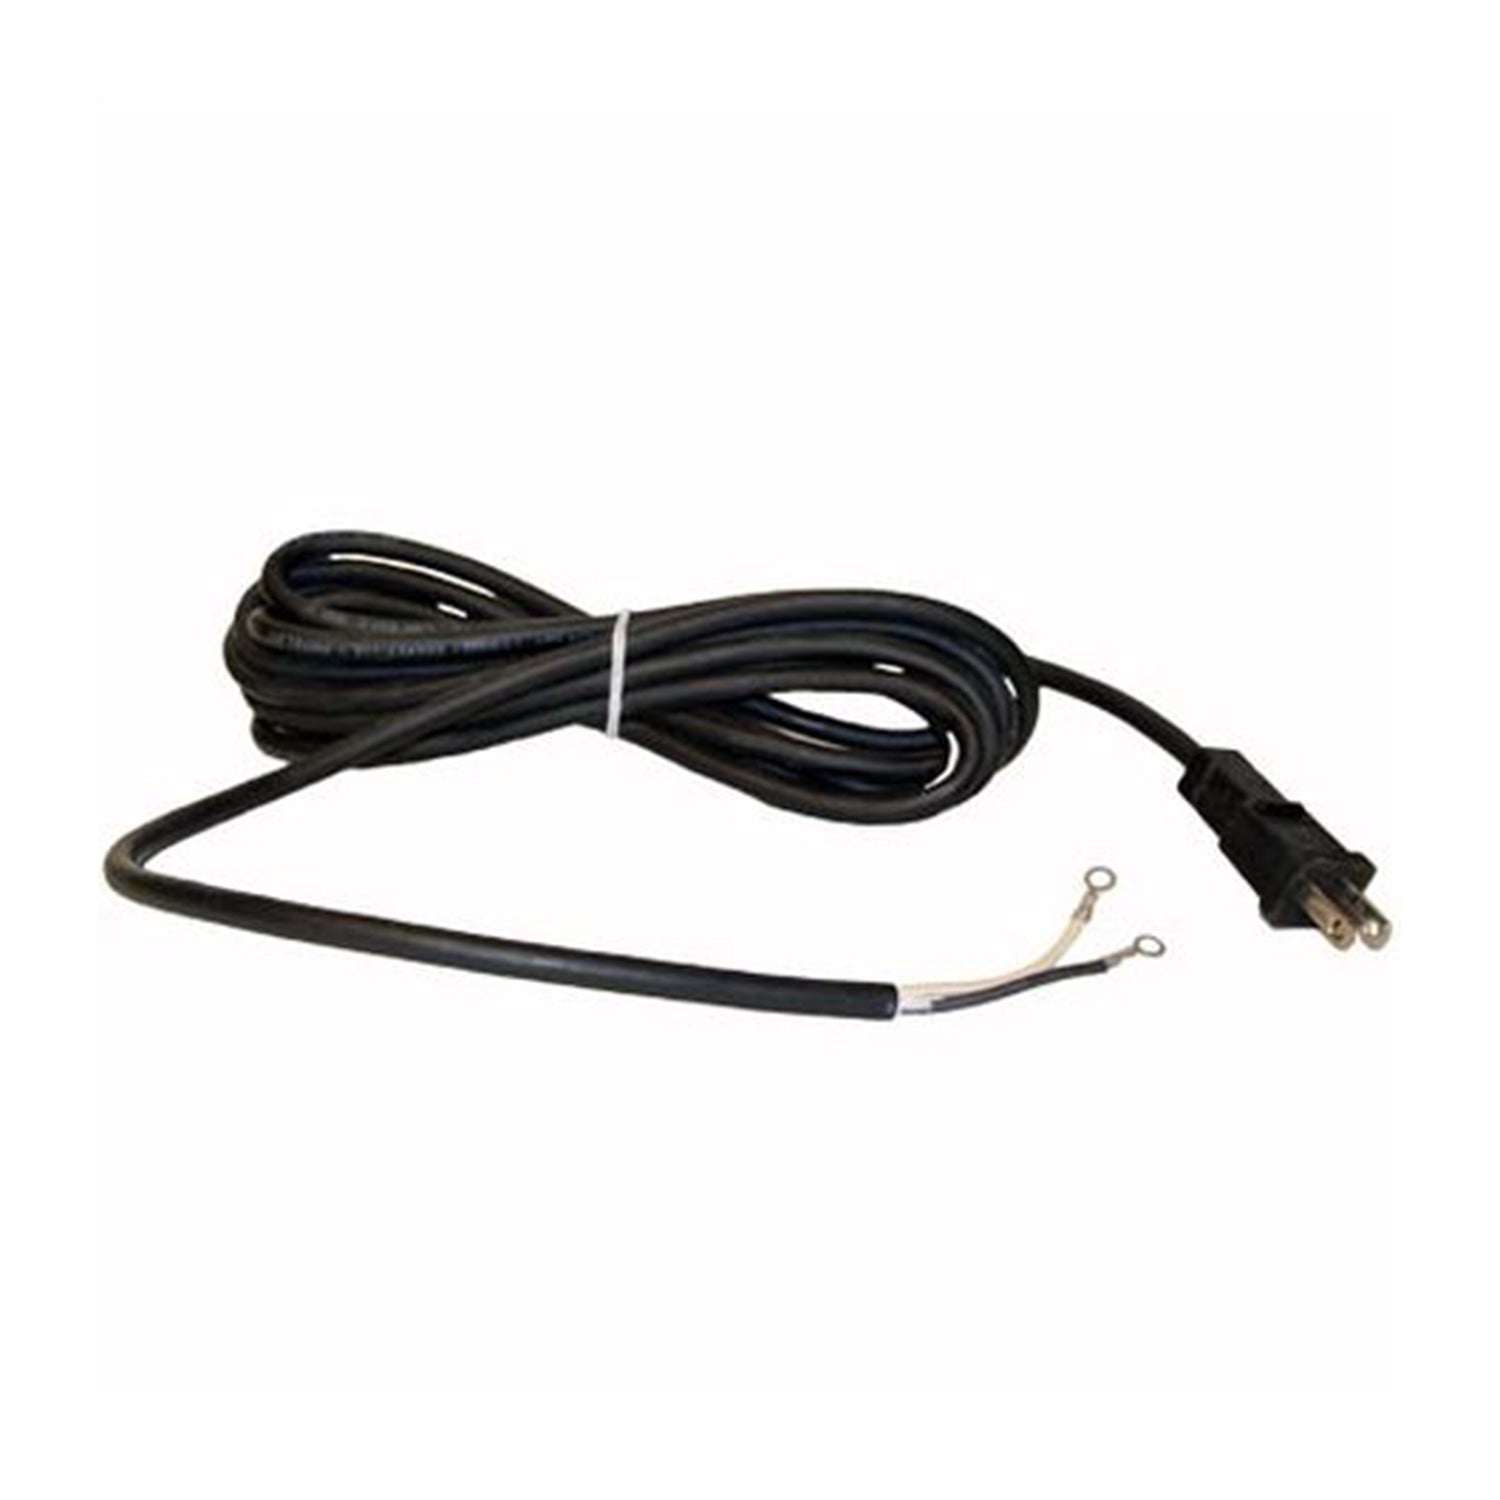 13-foot-power-cord